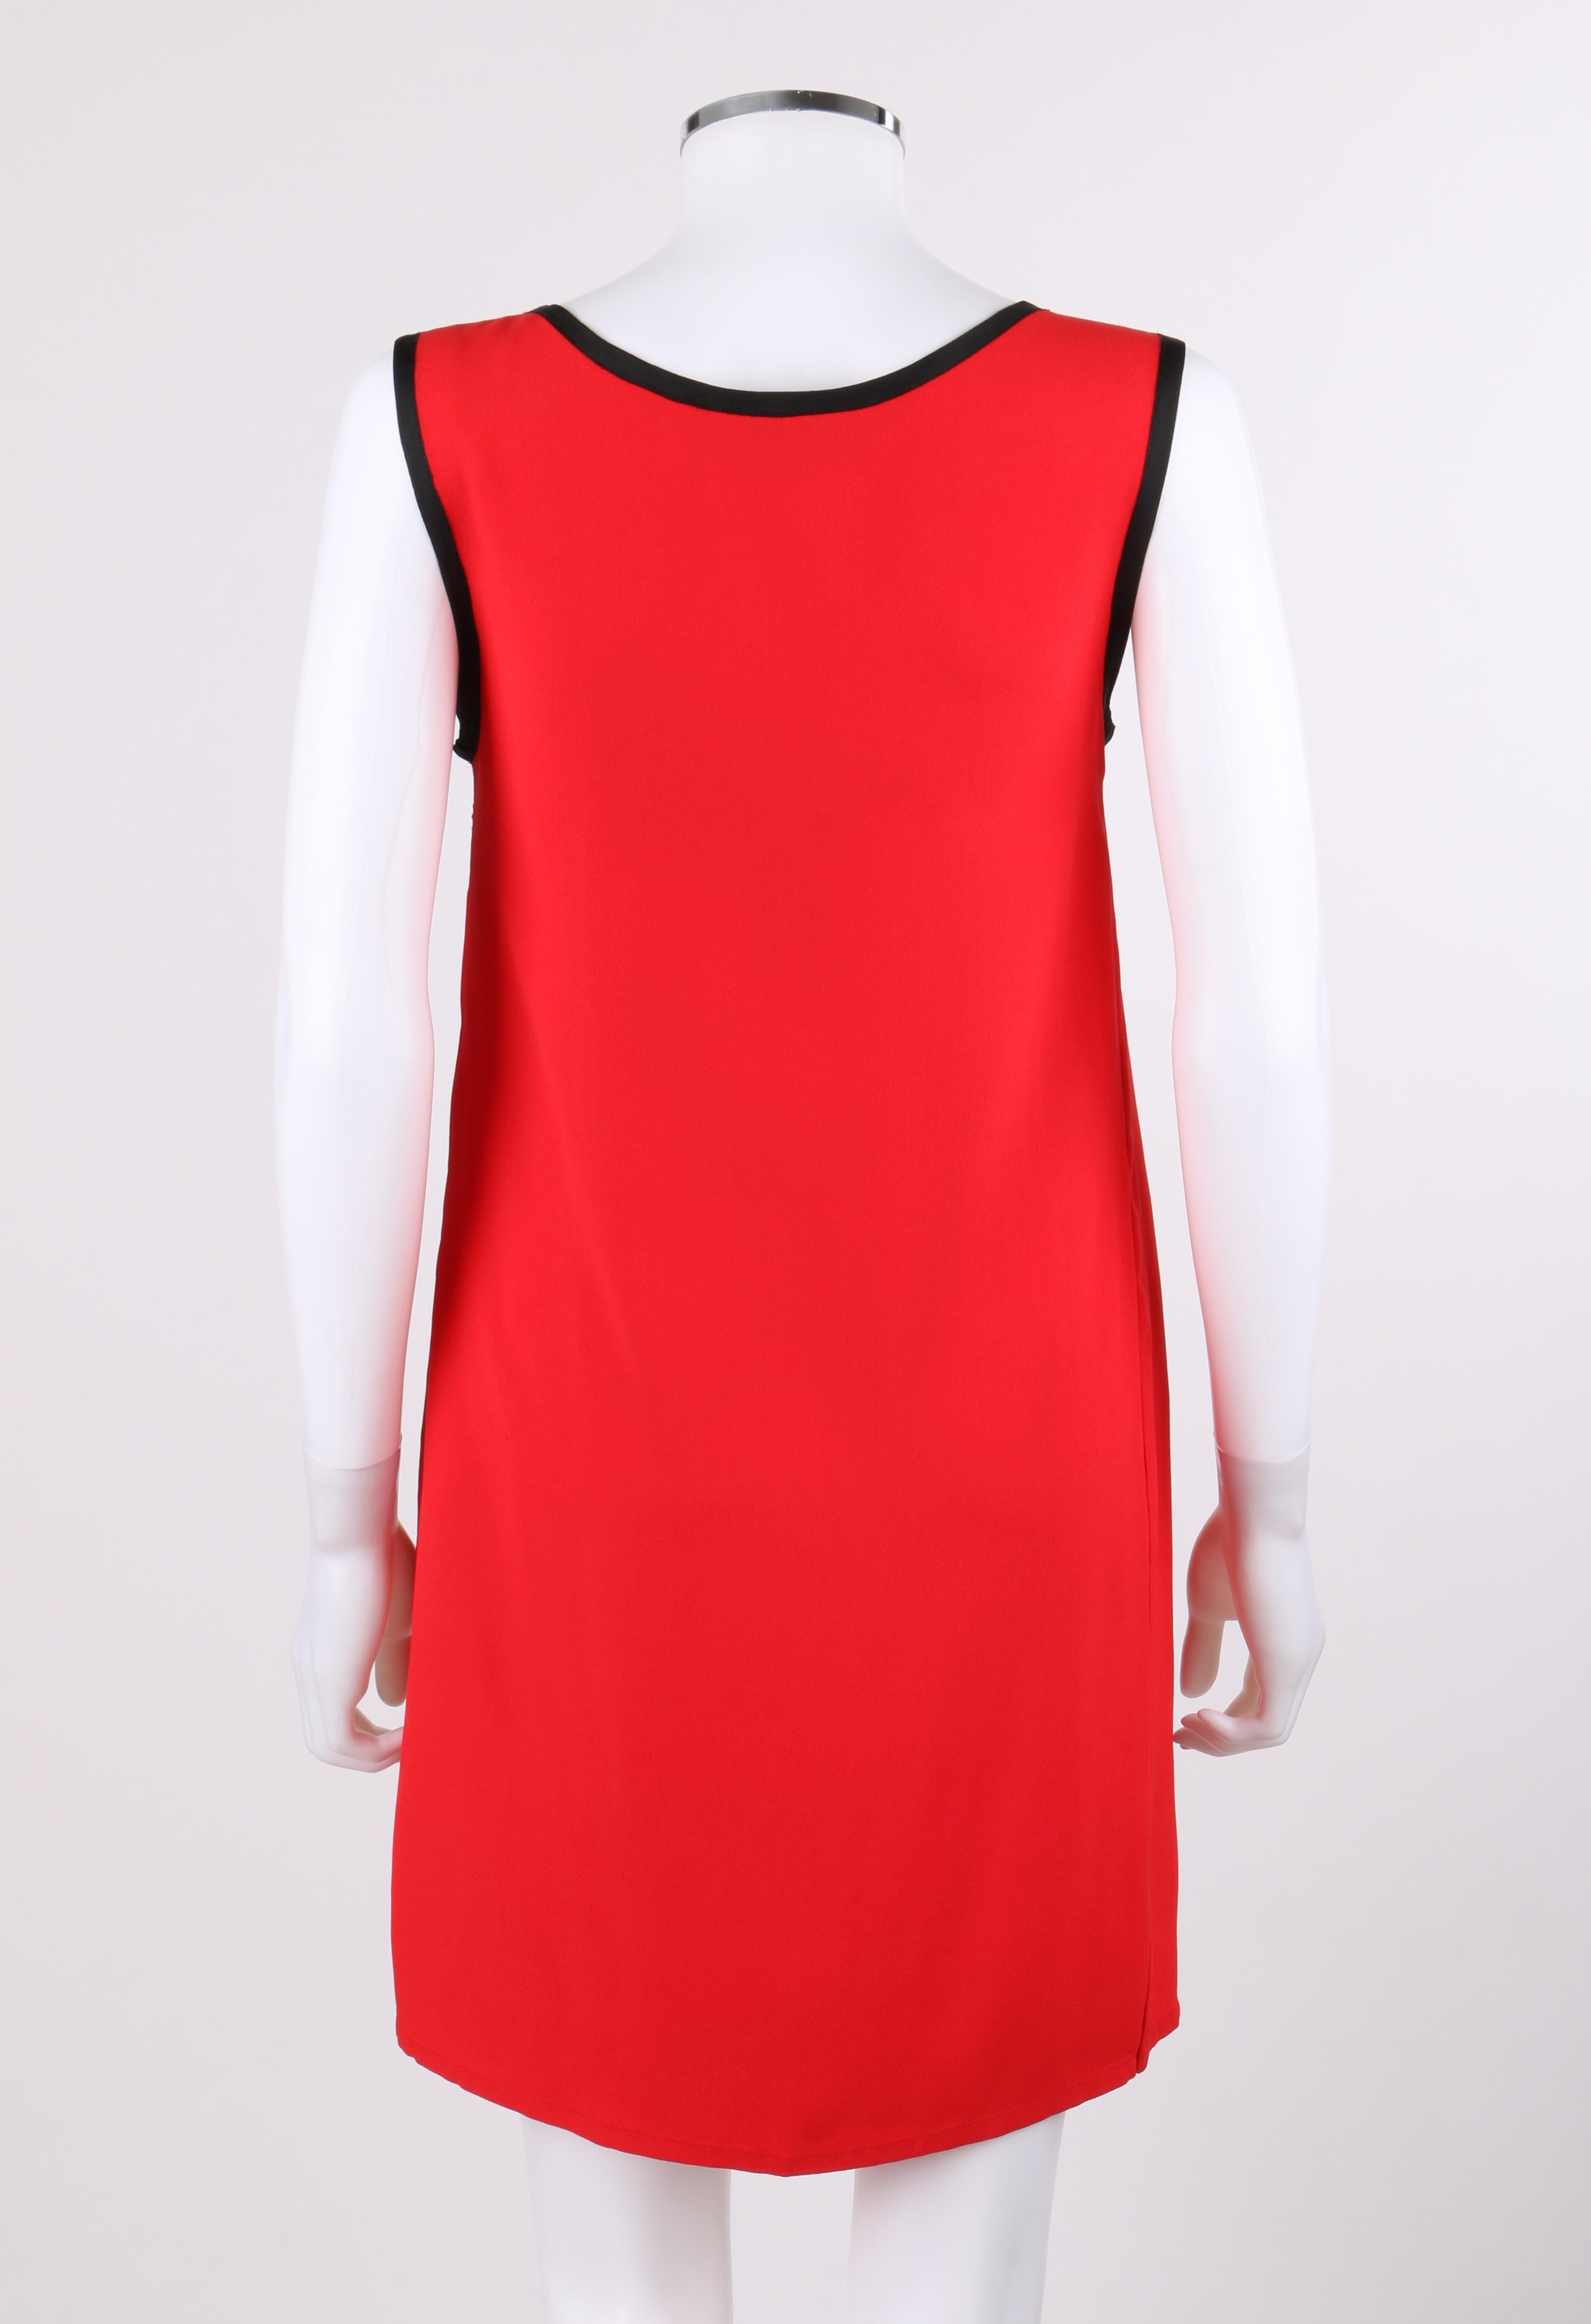 YVES SAINT LAURENT c.1980's YSL Red & Black Scoop Neck Tunic Top / Dress In Good Condition For Sale In Thiensville, WI